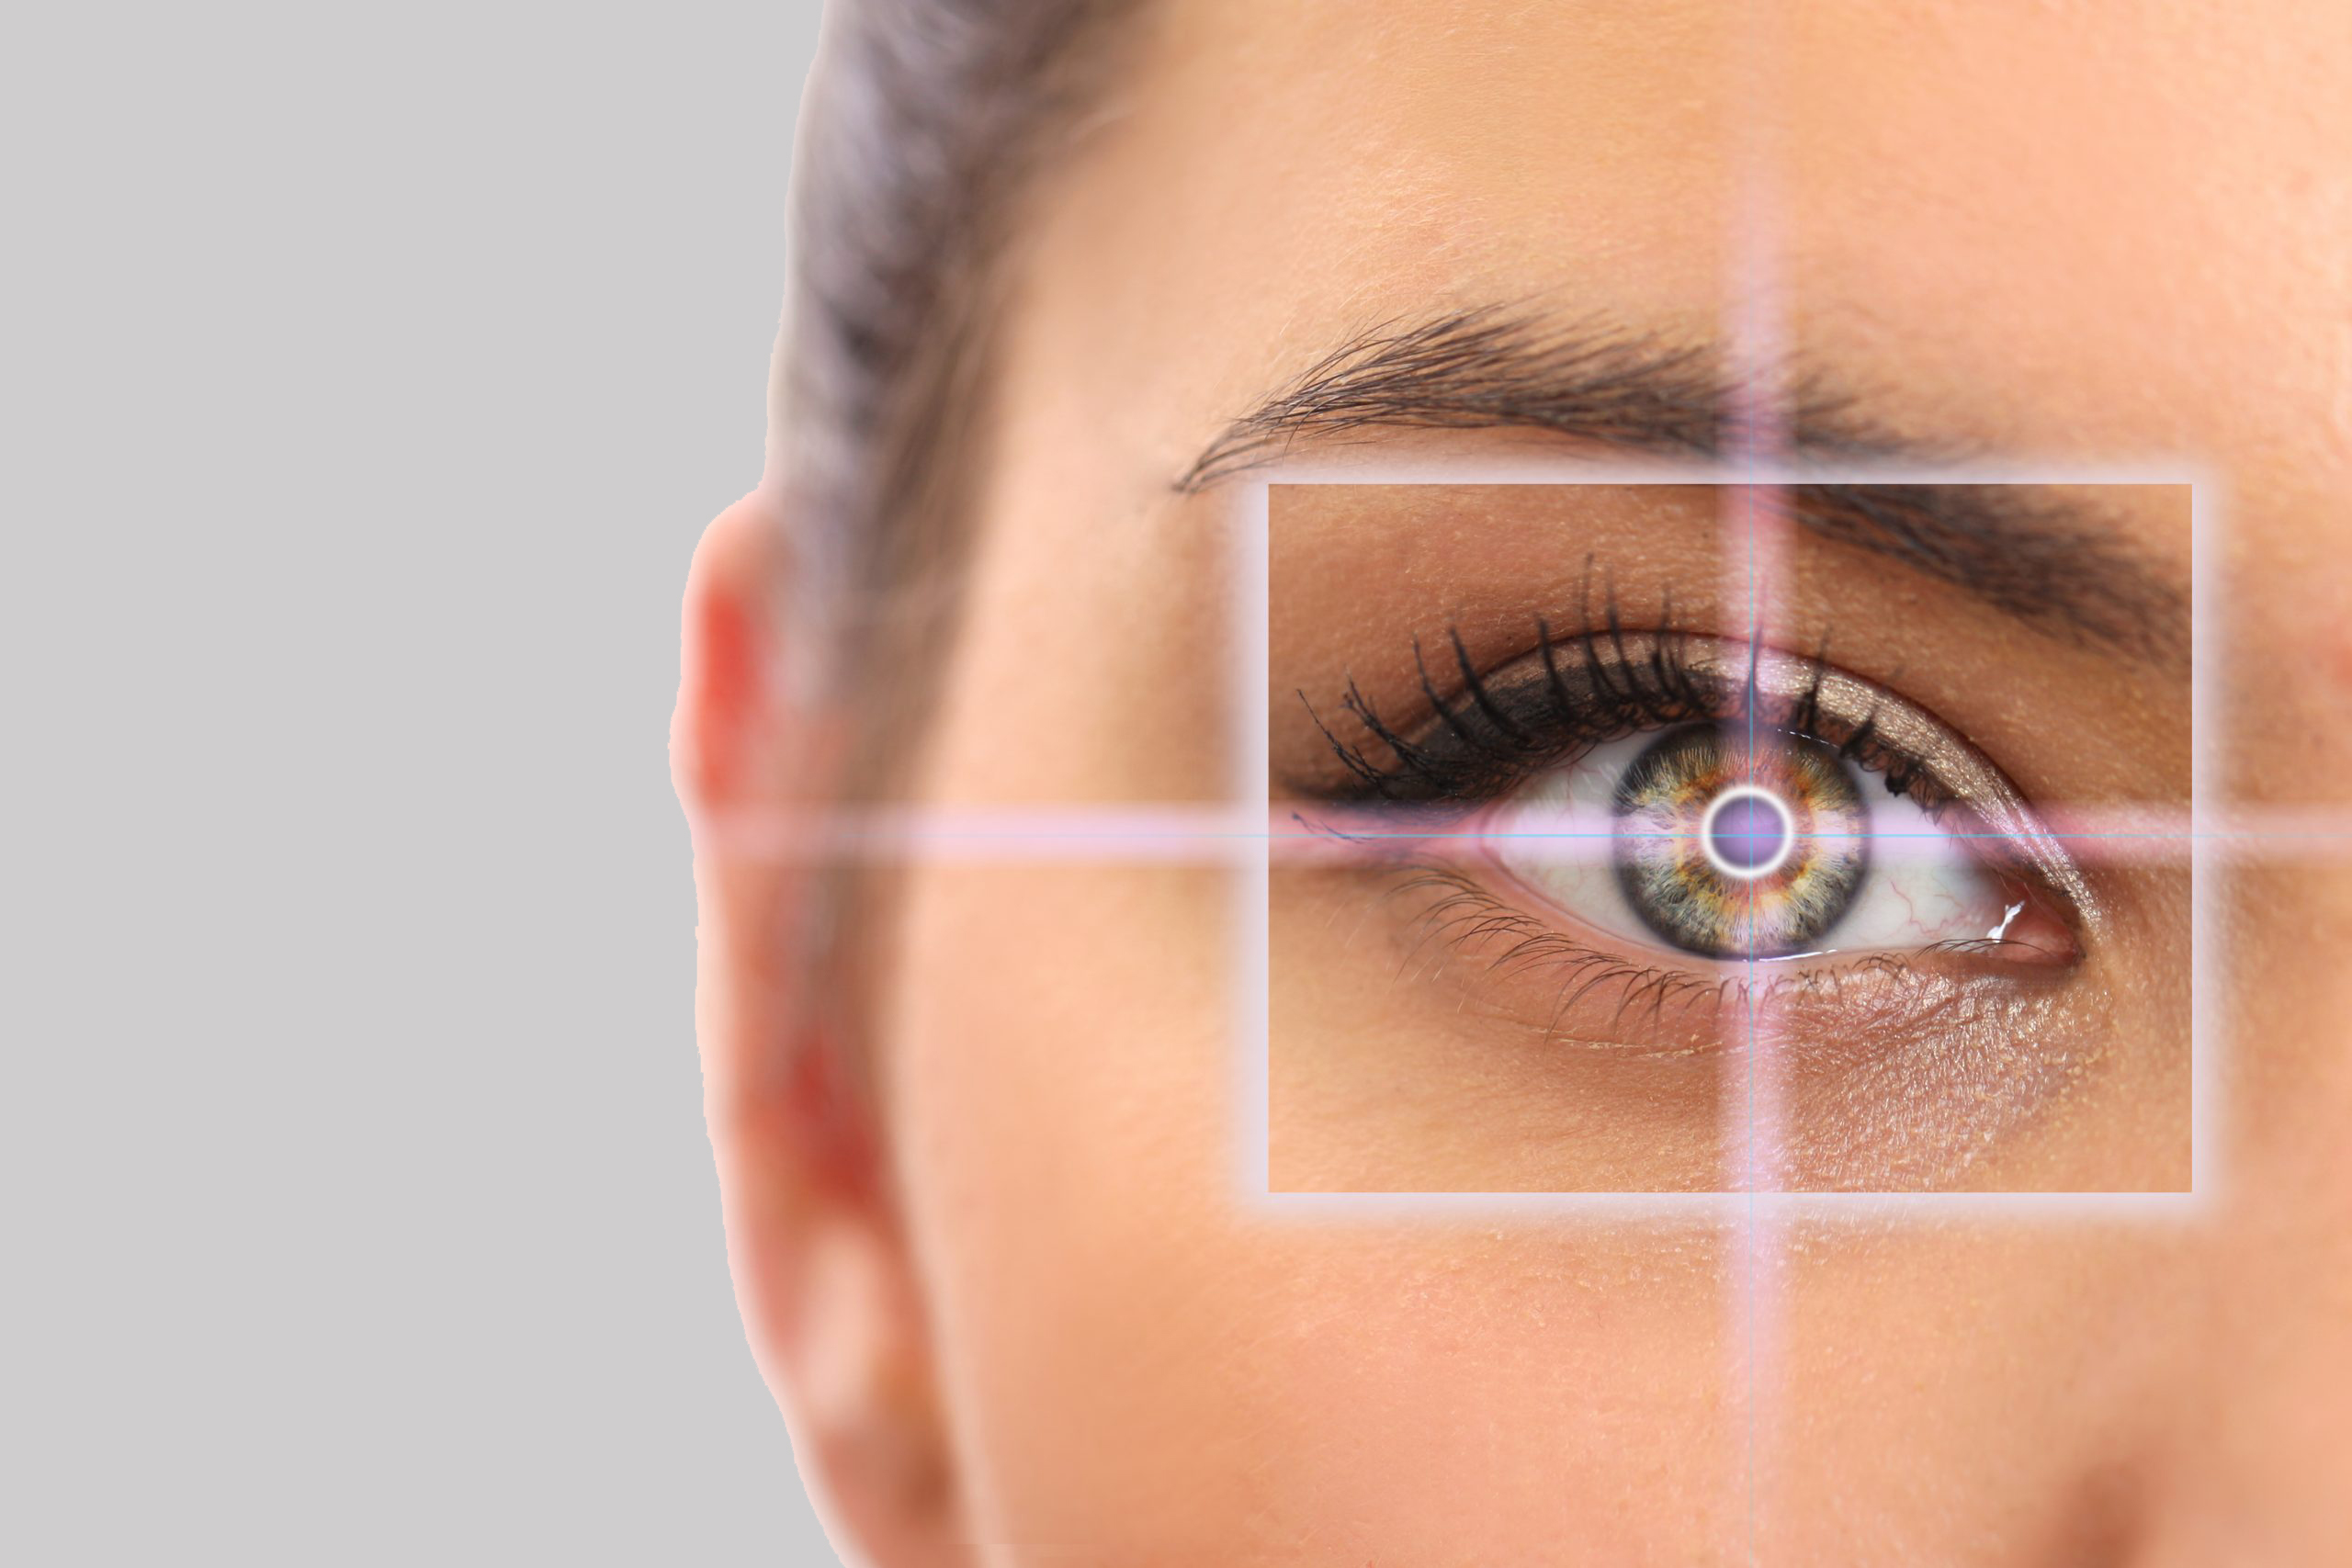 LASIK & Refractive Surgery in Brampton and Mississauga